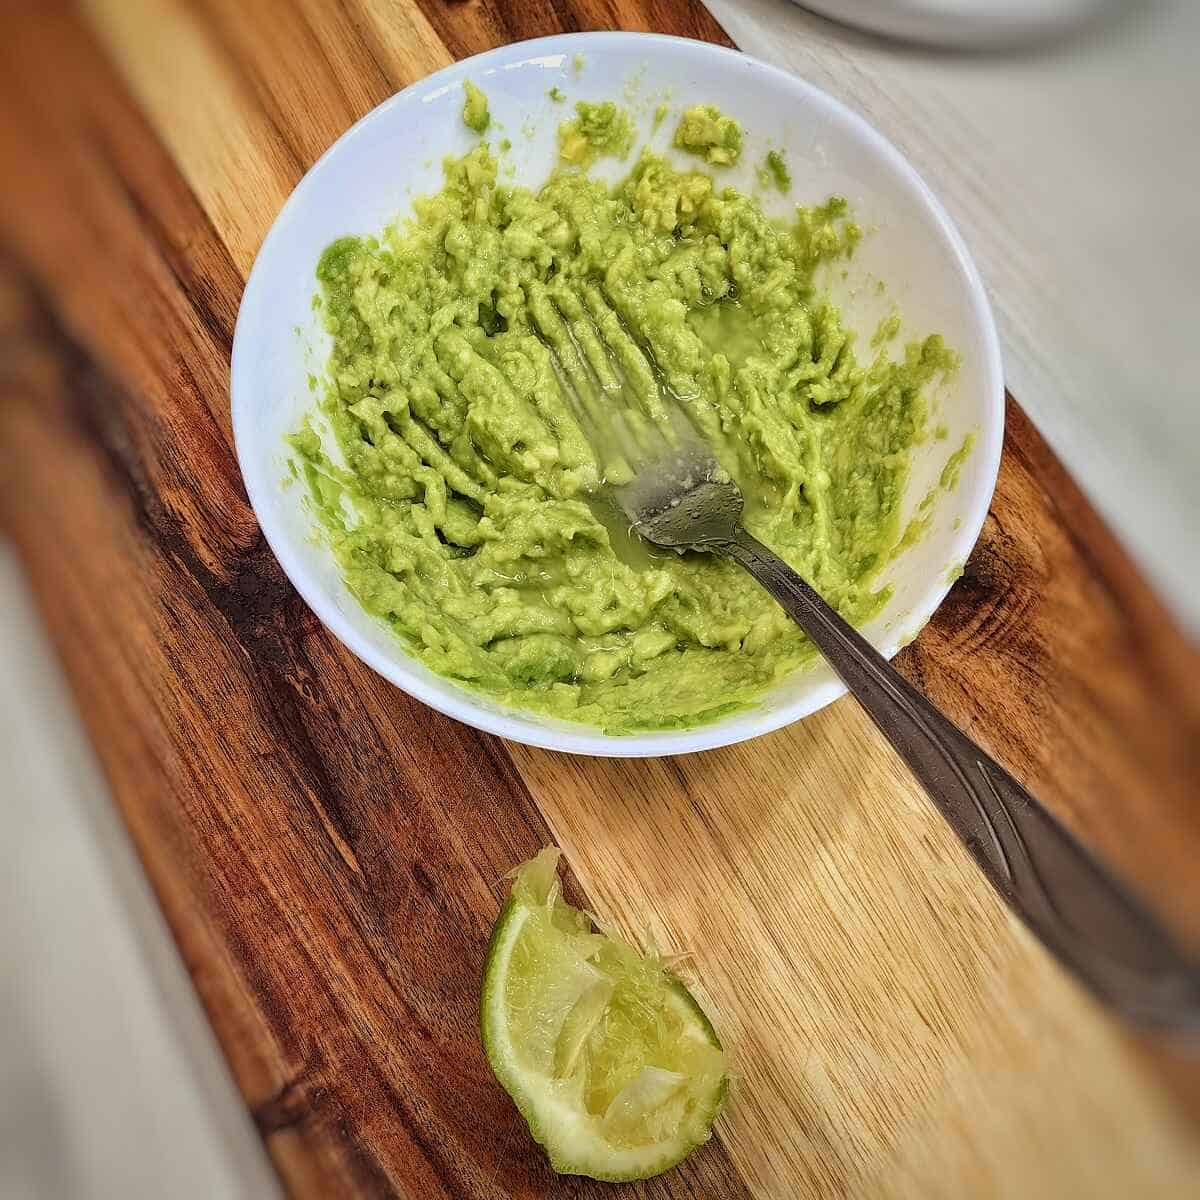 mashed avocado in a white bowl with a squeezed lime wedge on top of cutting board